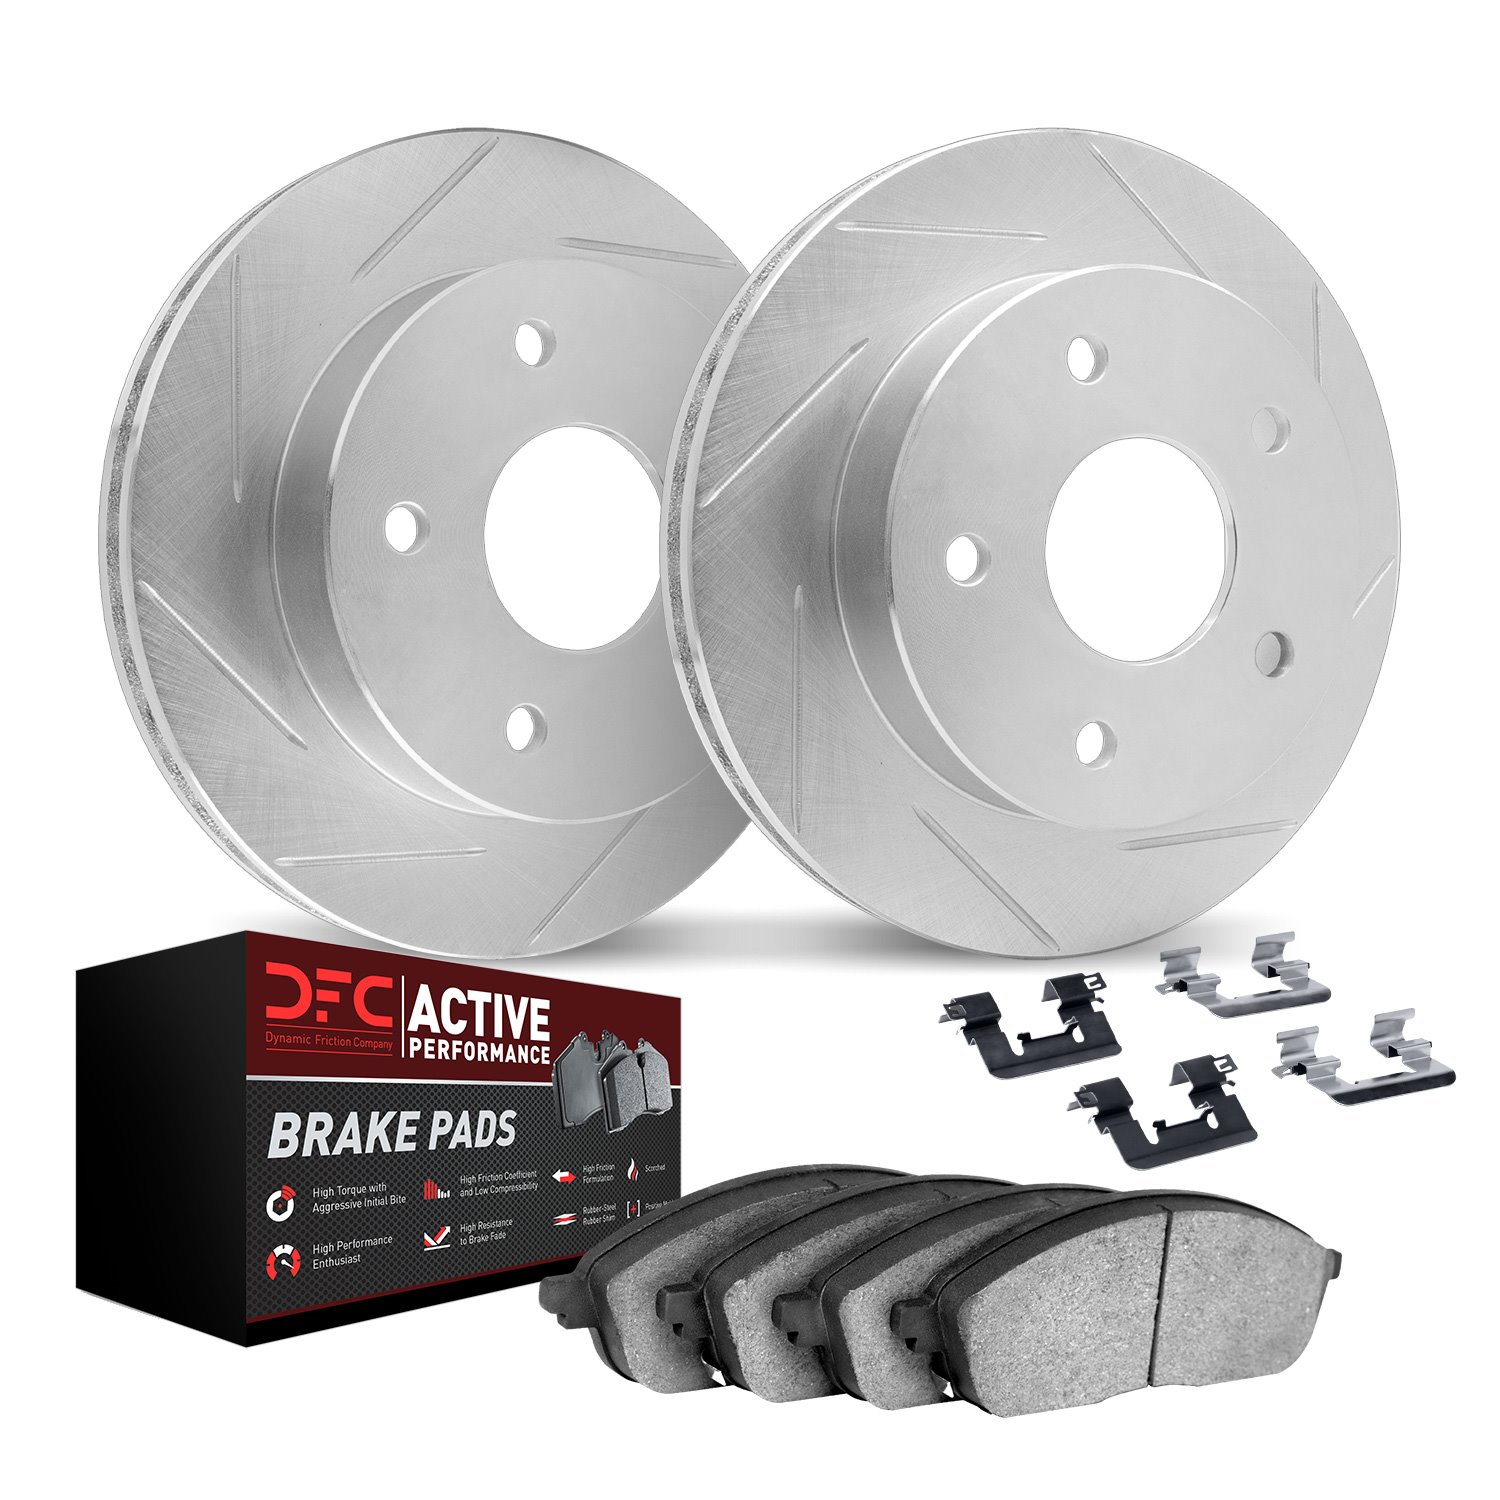 2712-67087 Geoperformance Slotted Brake Rotors with Active Performance Pads Kits & Hardware, Fits Select Multiple Makes/Models,